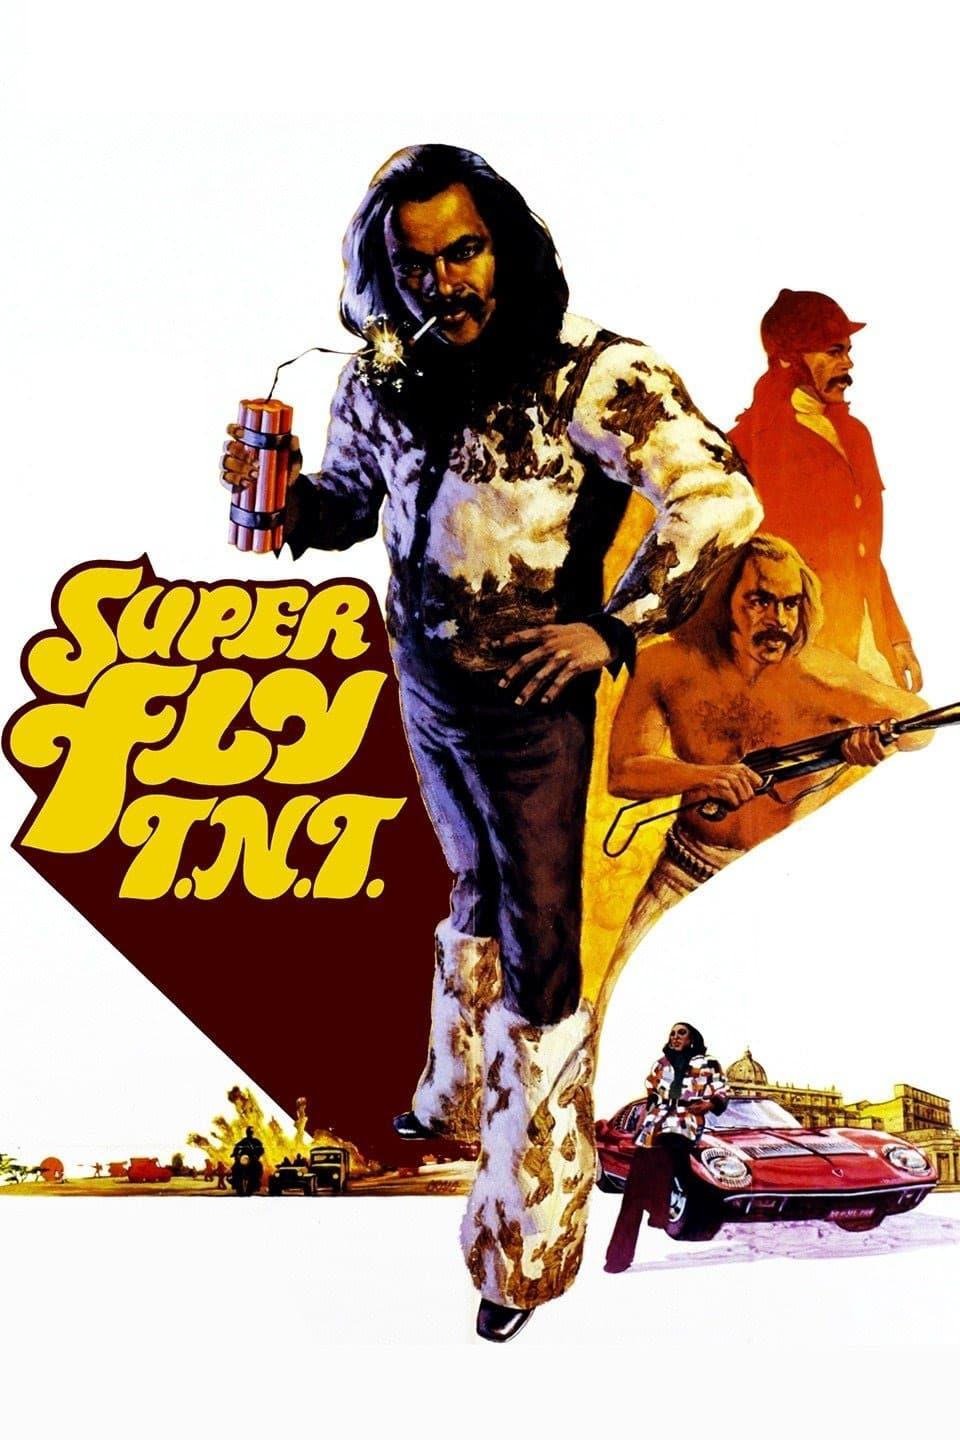 Super Fly T.N.T. poster